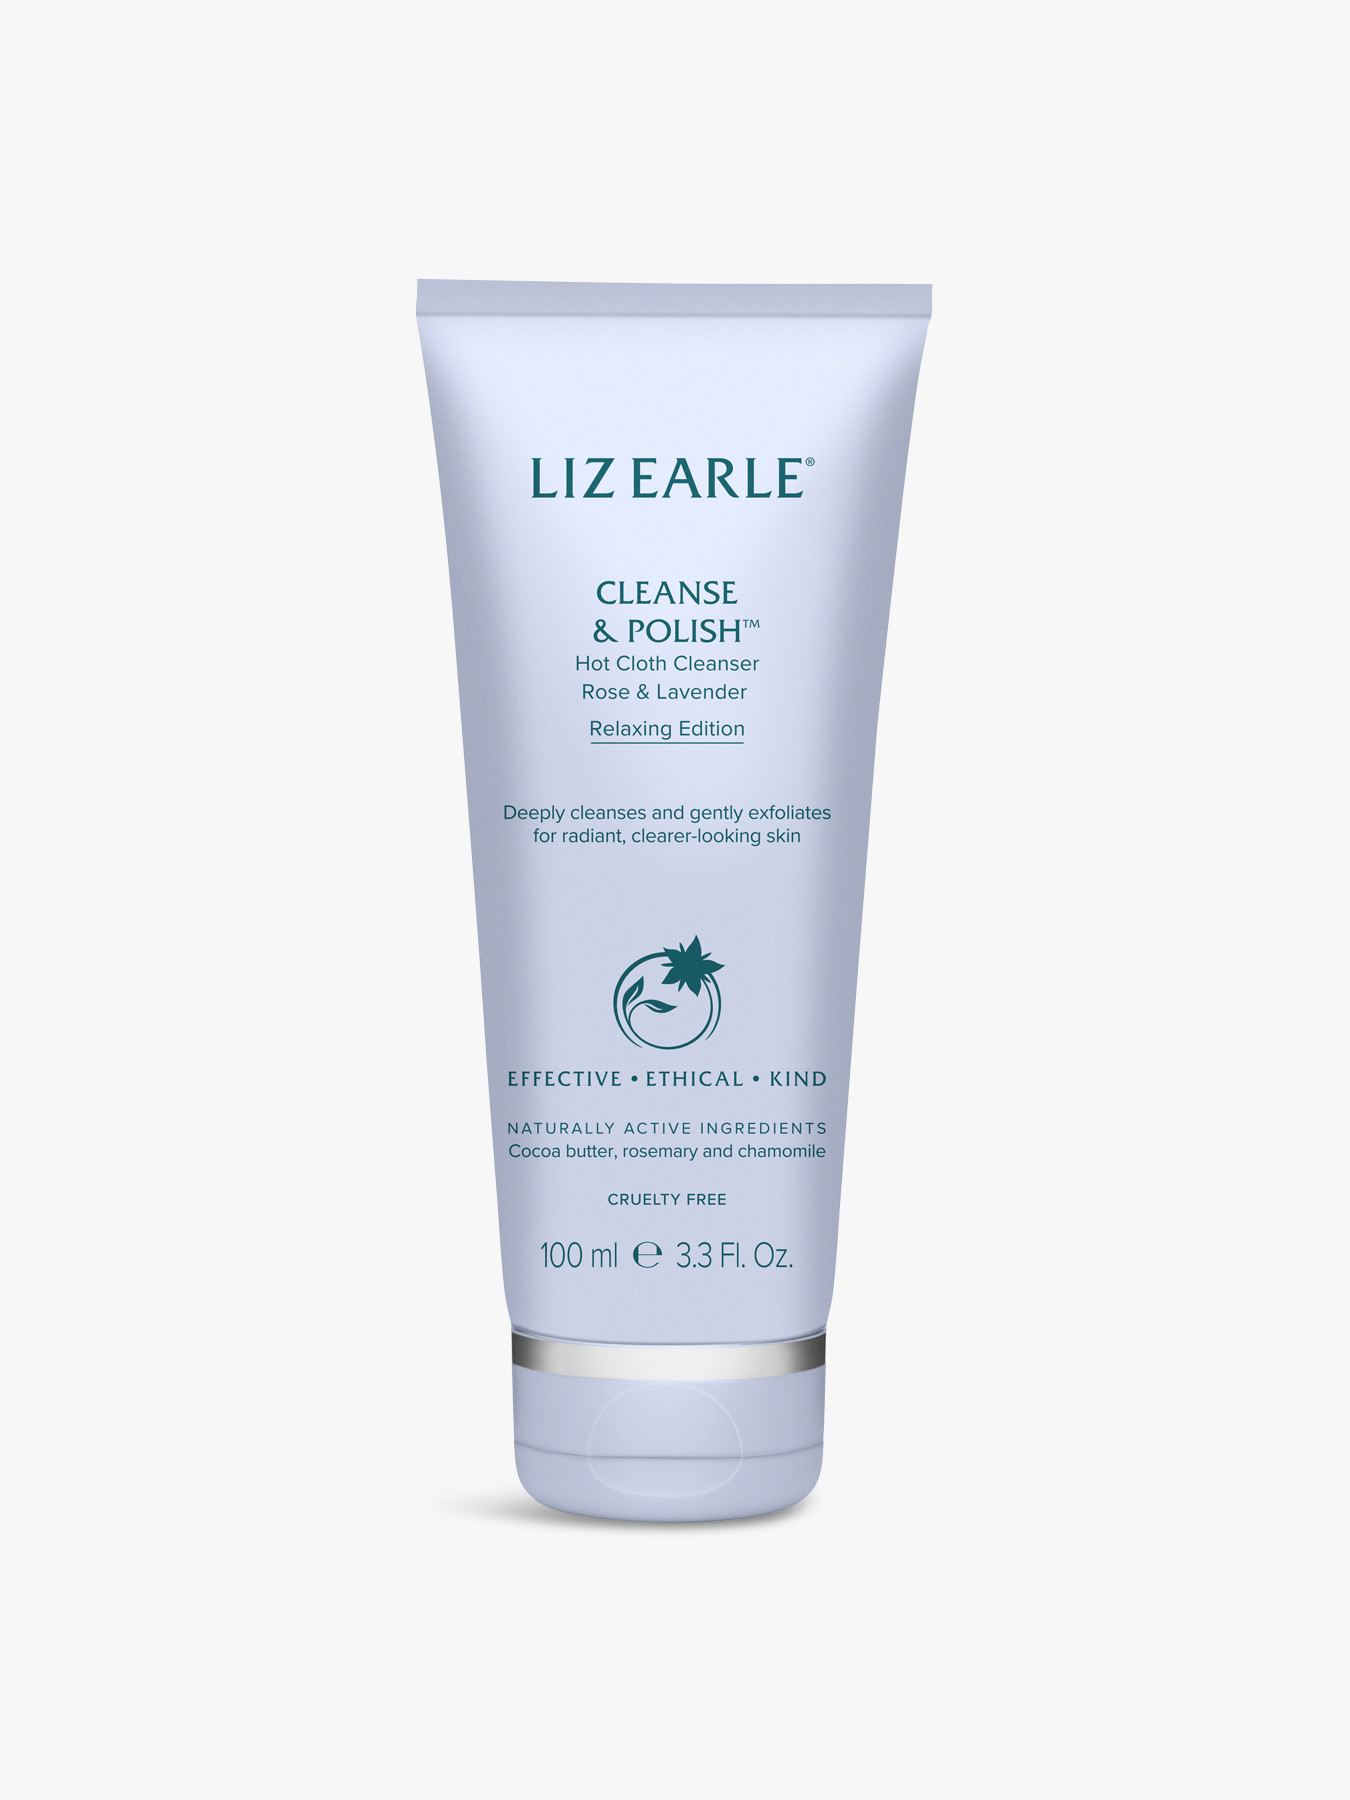 Liz Earle Cleanse And Polish Relaxing Edition 100ml Tube